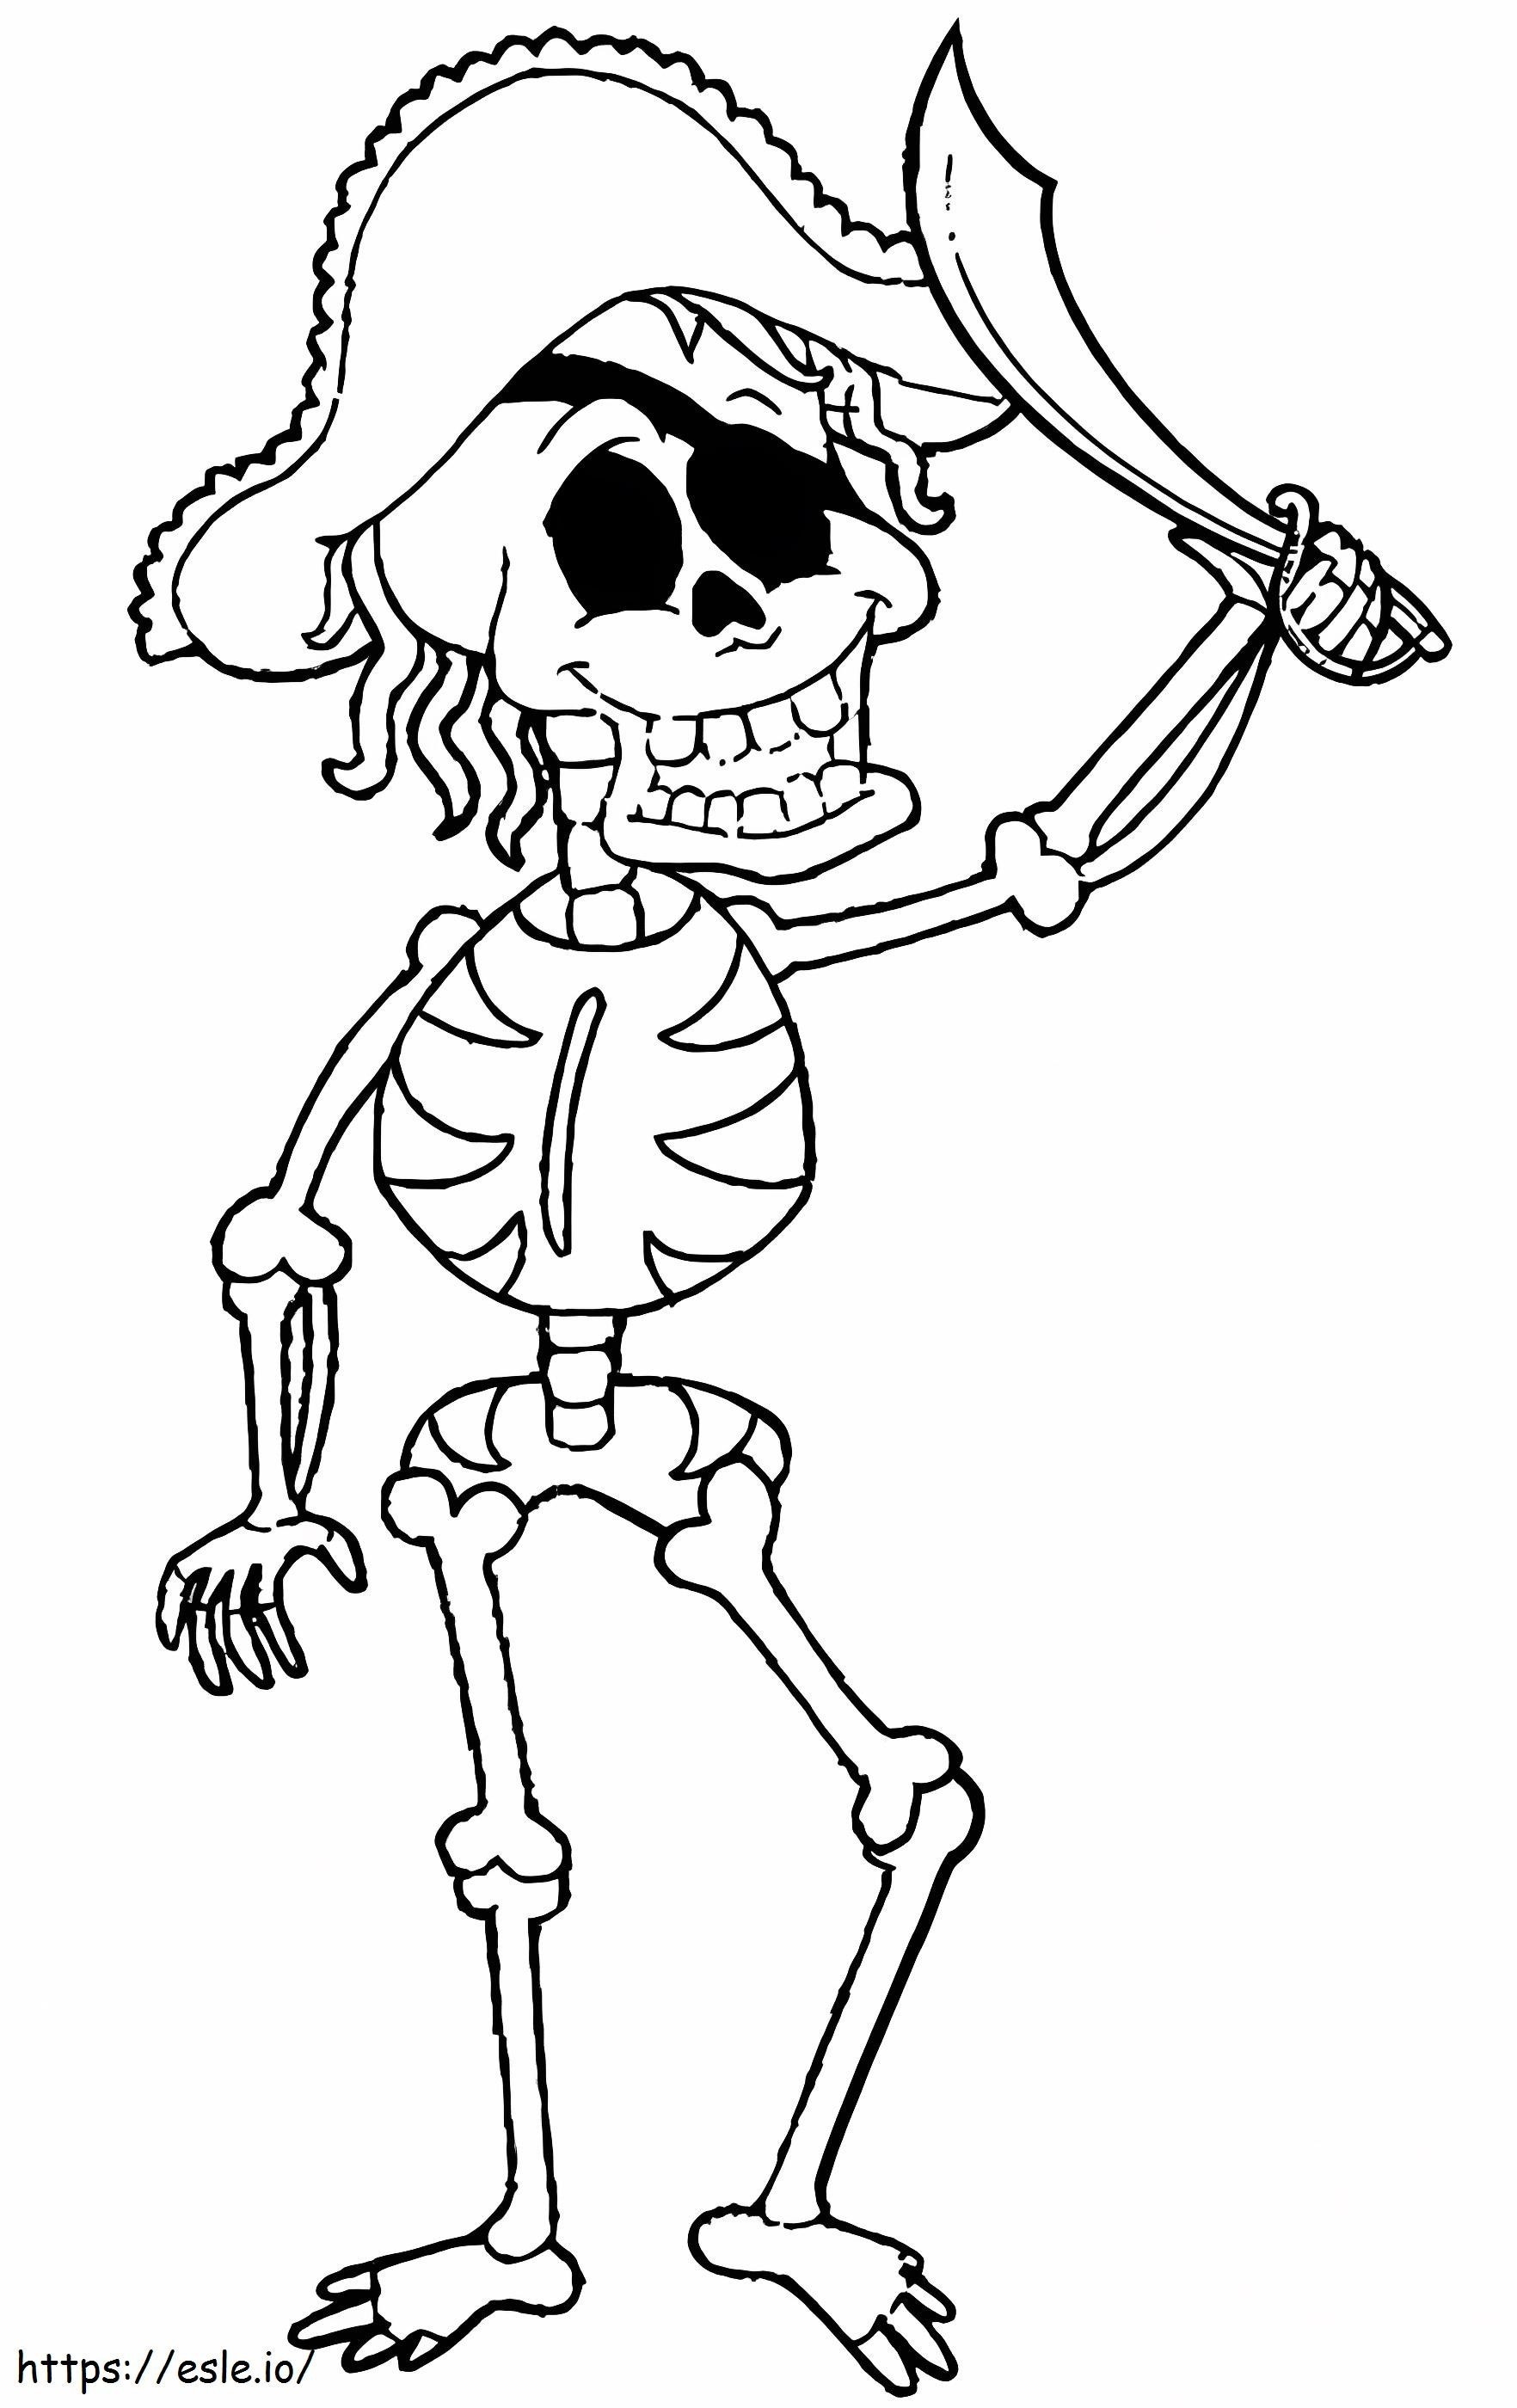 Funny Pirate Skeleton With Sword coloring page